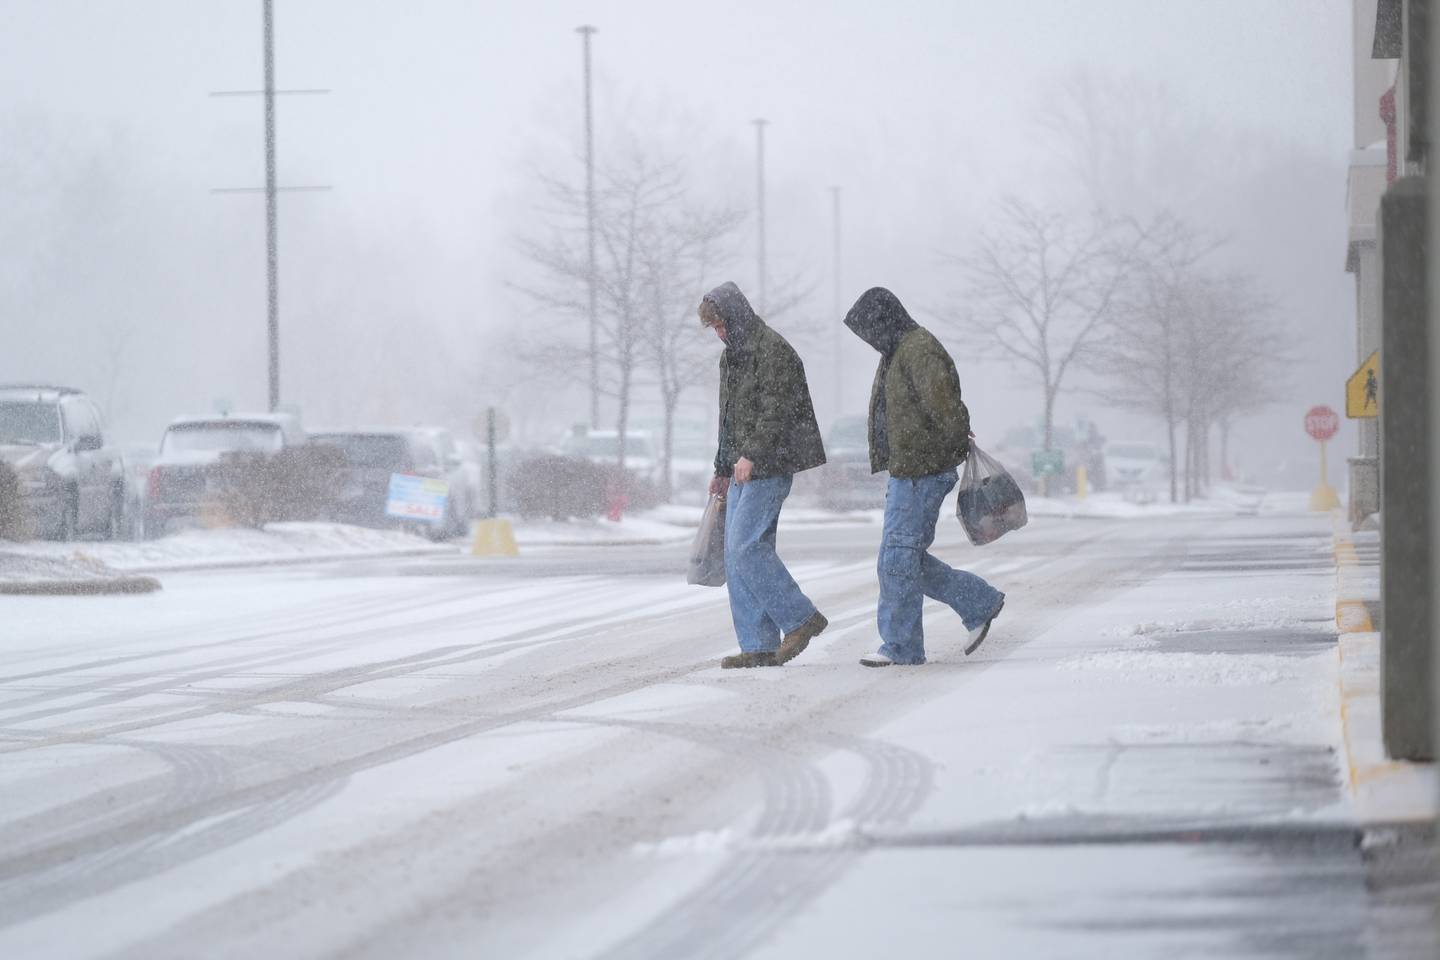 Shoppers leave a store as the snow falls at Louis Joliet Pointe Shopping Center. Thursday, Feb. 17, 2022, in Joliet.